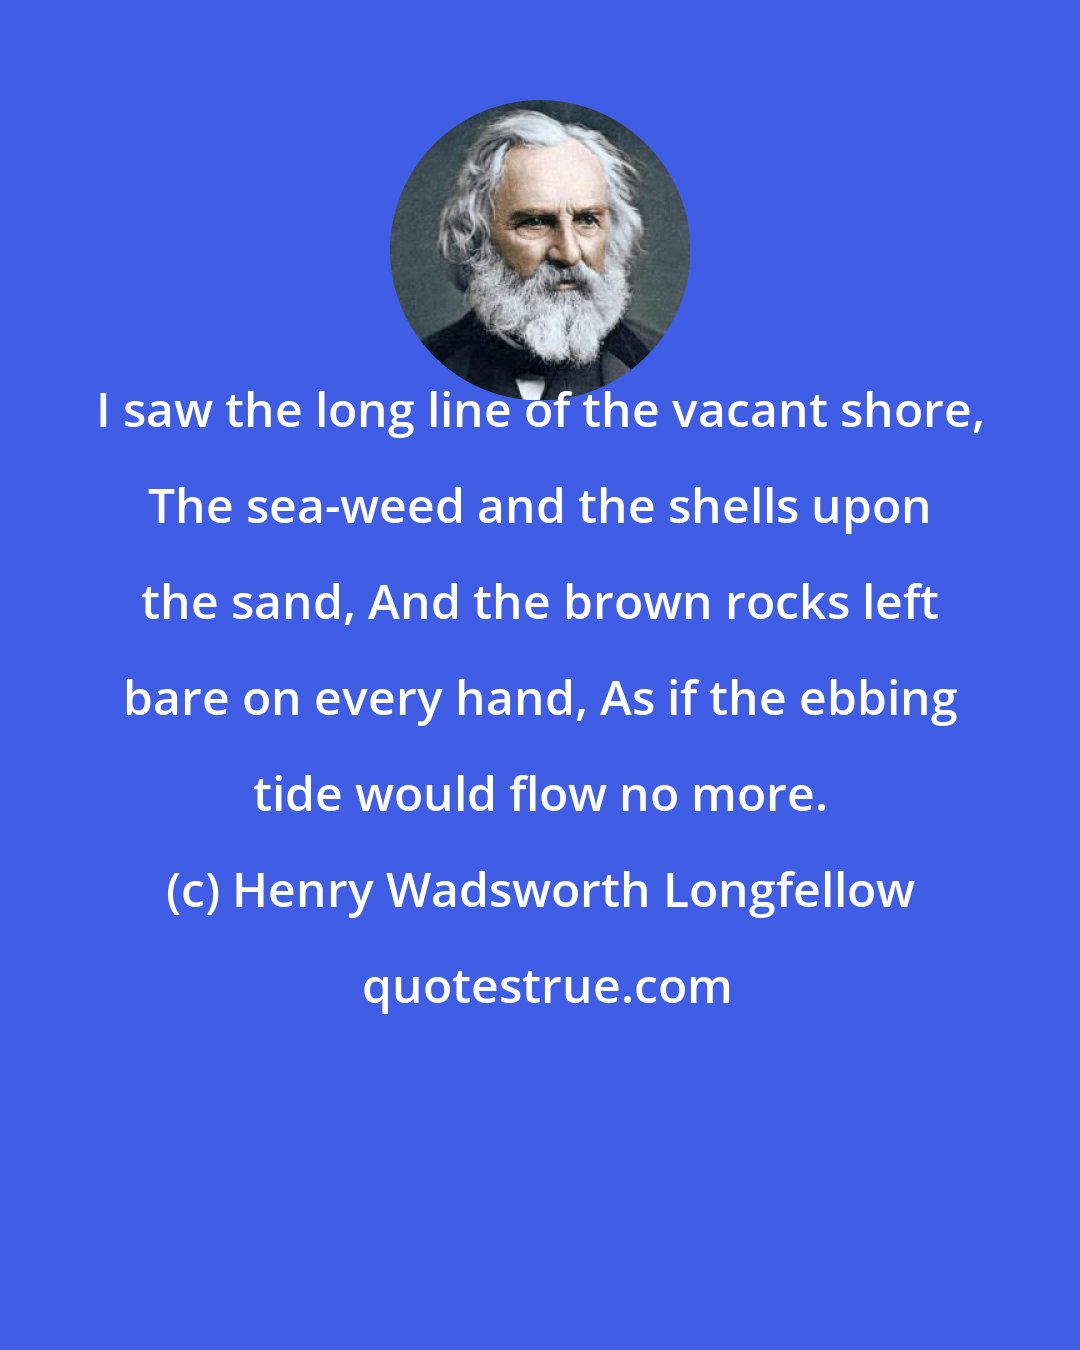 Henry Wadsworth Longfellow: I saw the long line of the vacant shore, The sea-weed and the shells upon the sand, And the brown rocks left bare on every hand, As if the ebbing tide would flow no more.